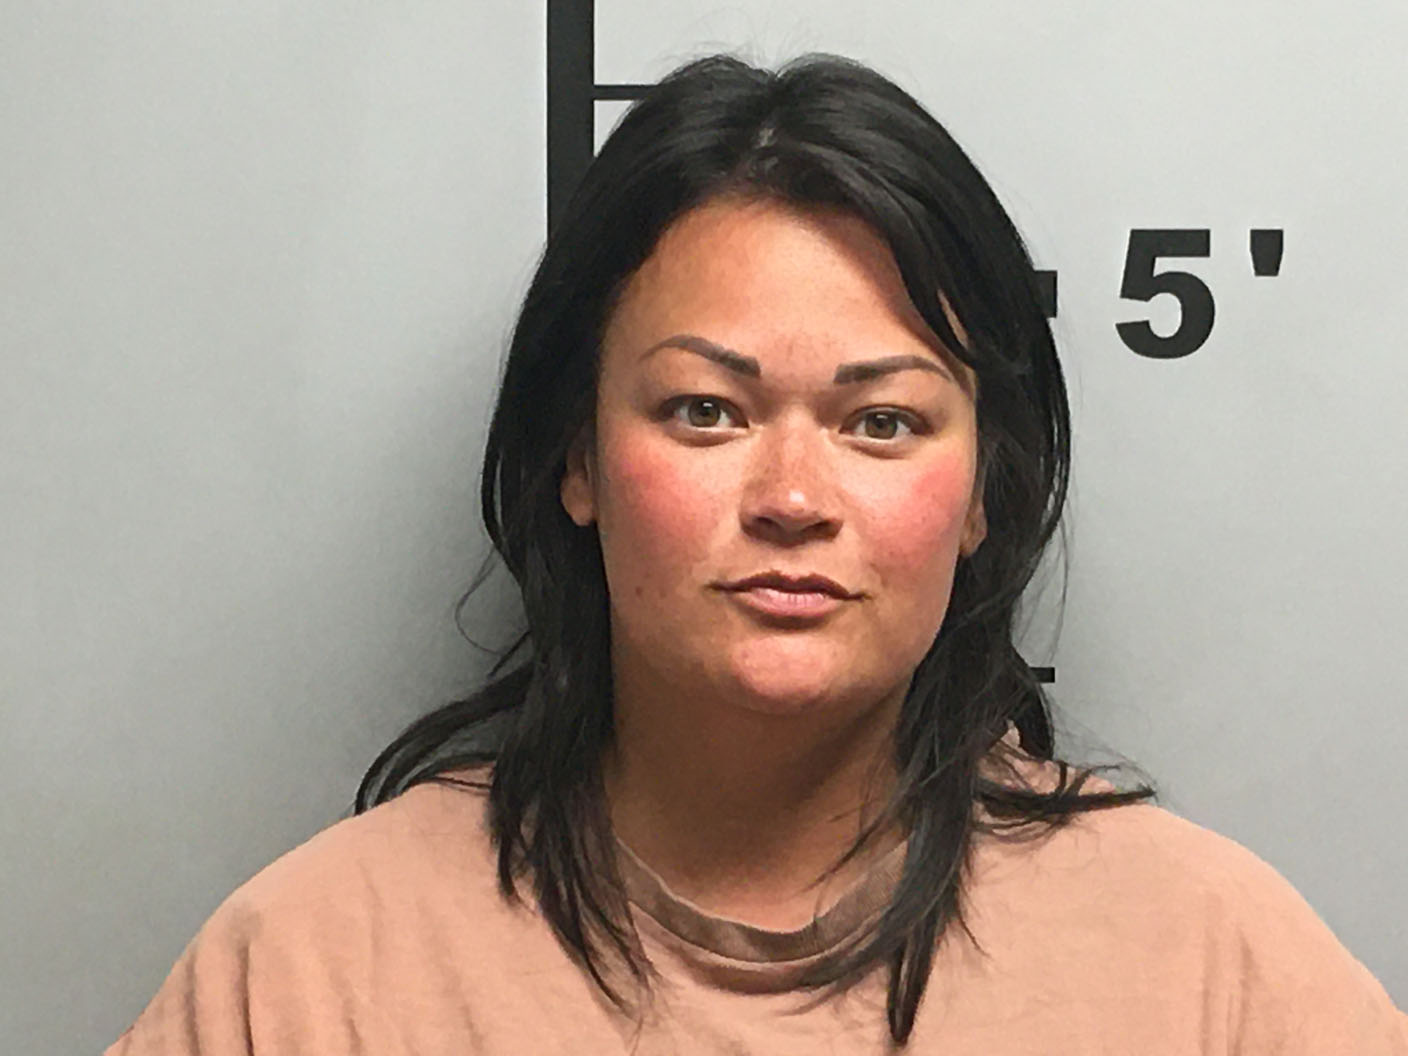 Rogers woman arrested, accused of having sex with 15-year-old